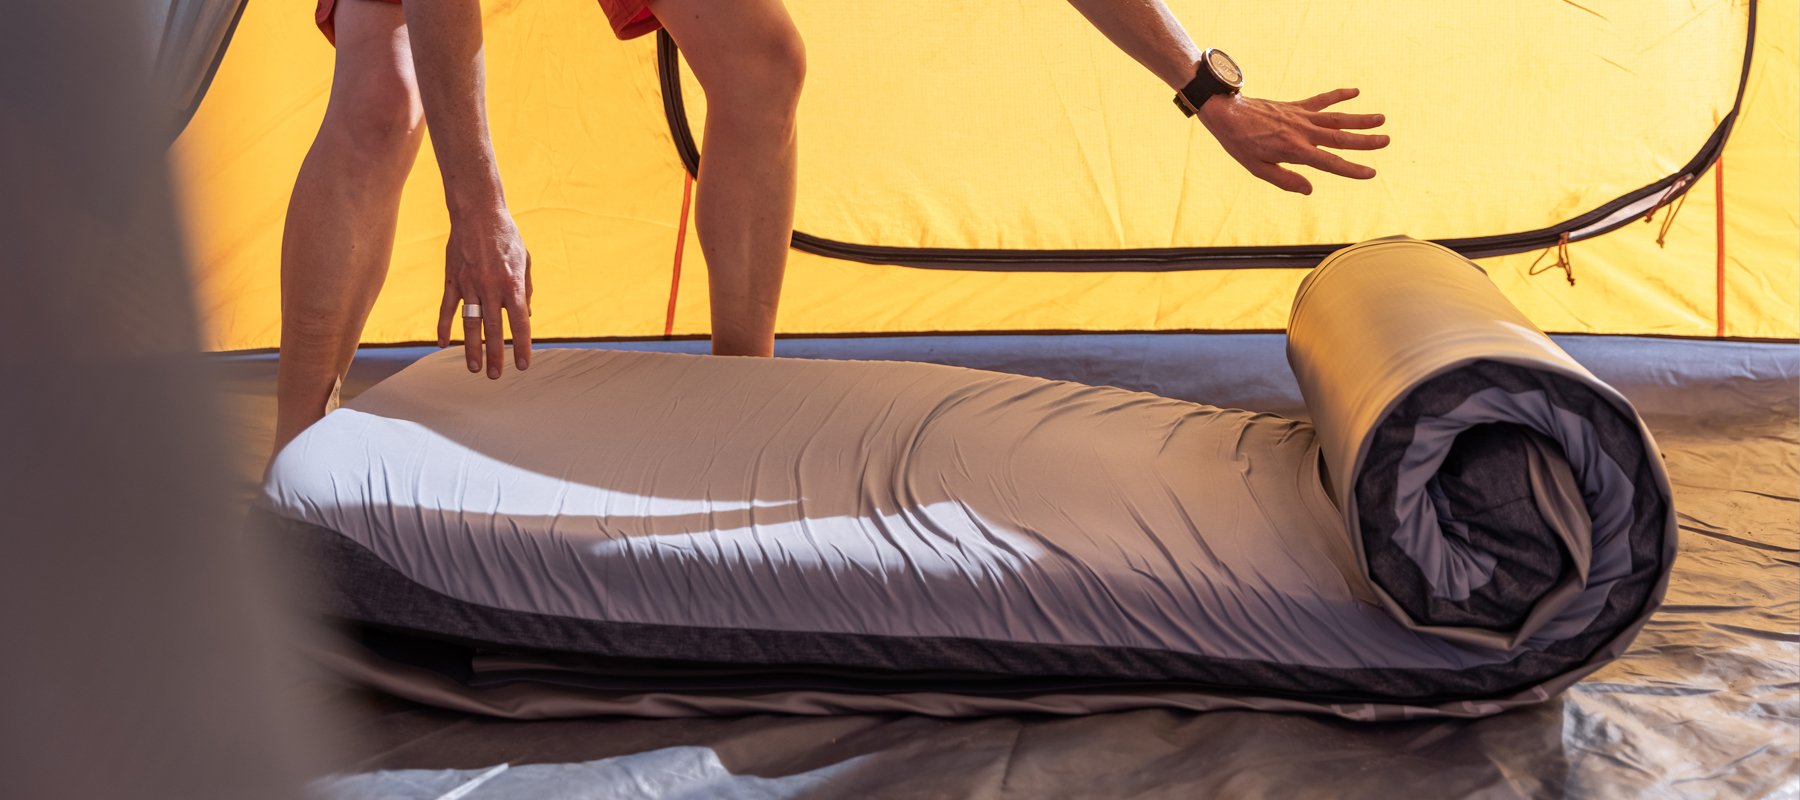 camping with an injury or chronic back pain Best mattress car camping.